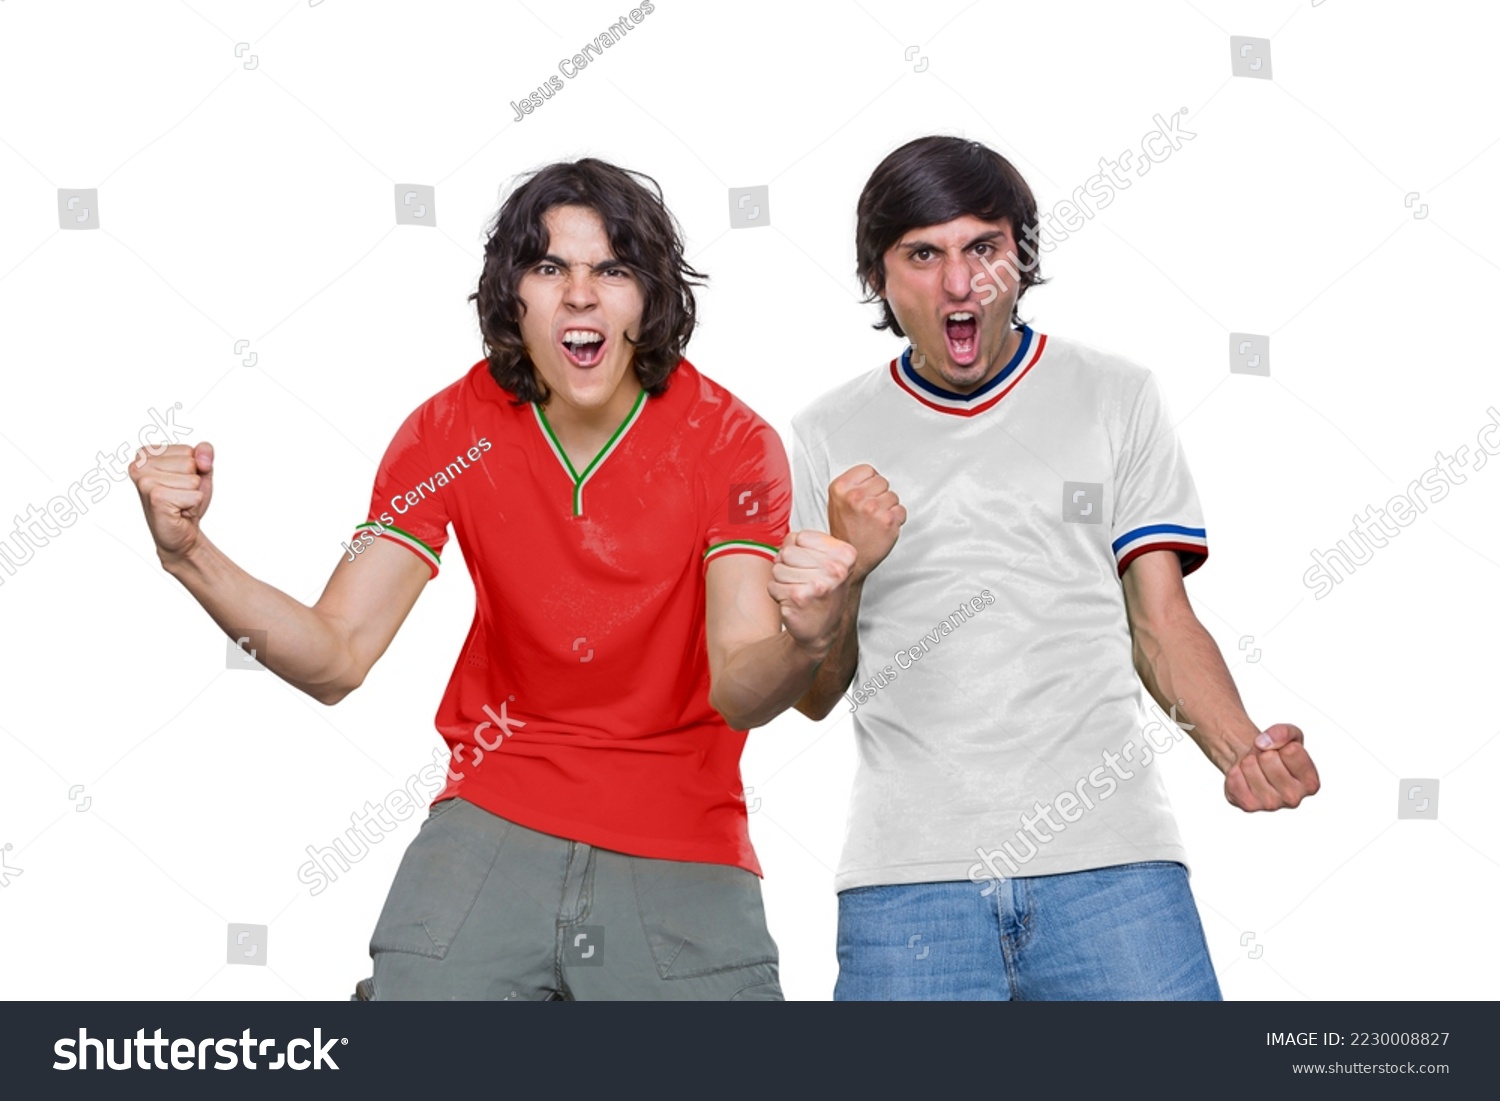 Two Soccer fans man with jersey and face painted with the flag of the IR IRAN and USA teams screaming with emotion on white background. #2230008827